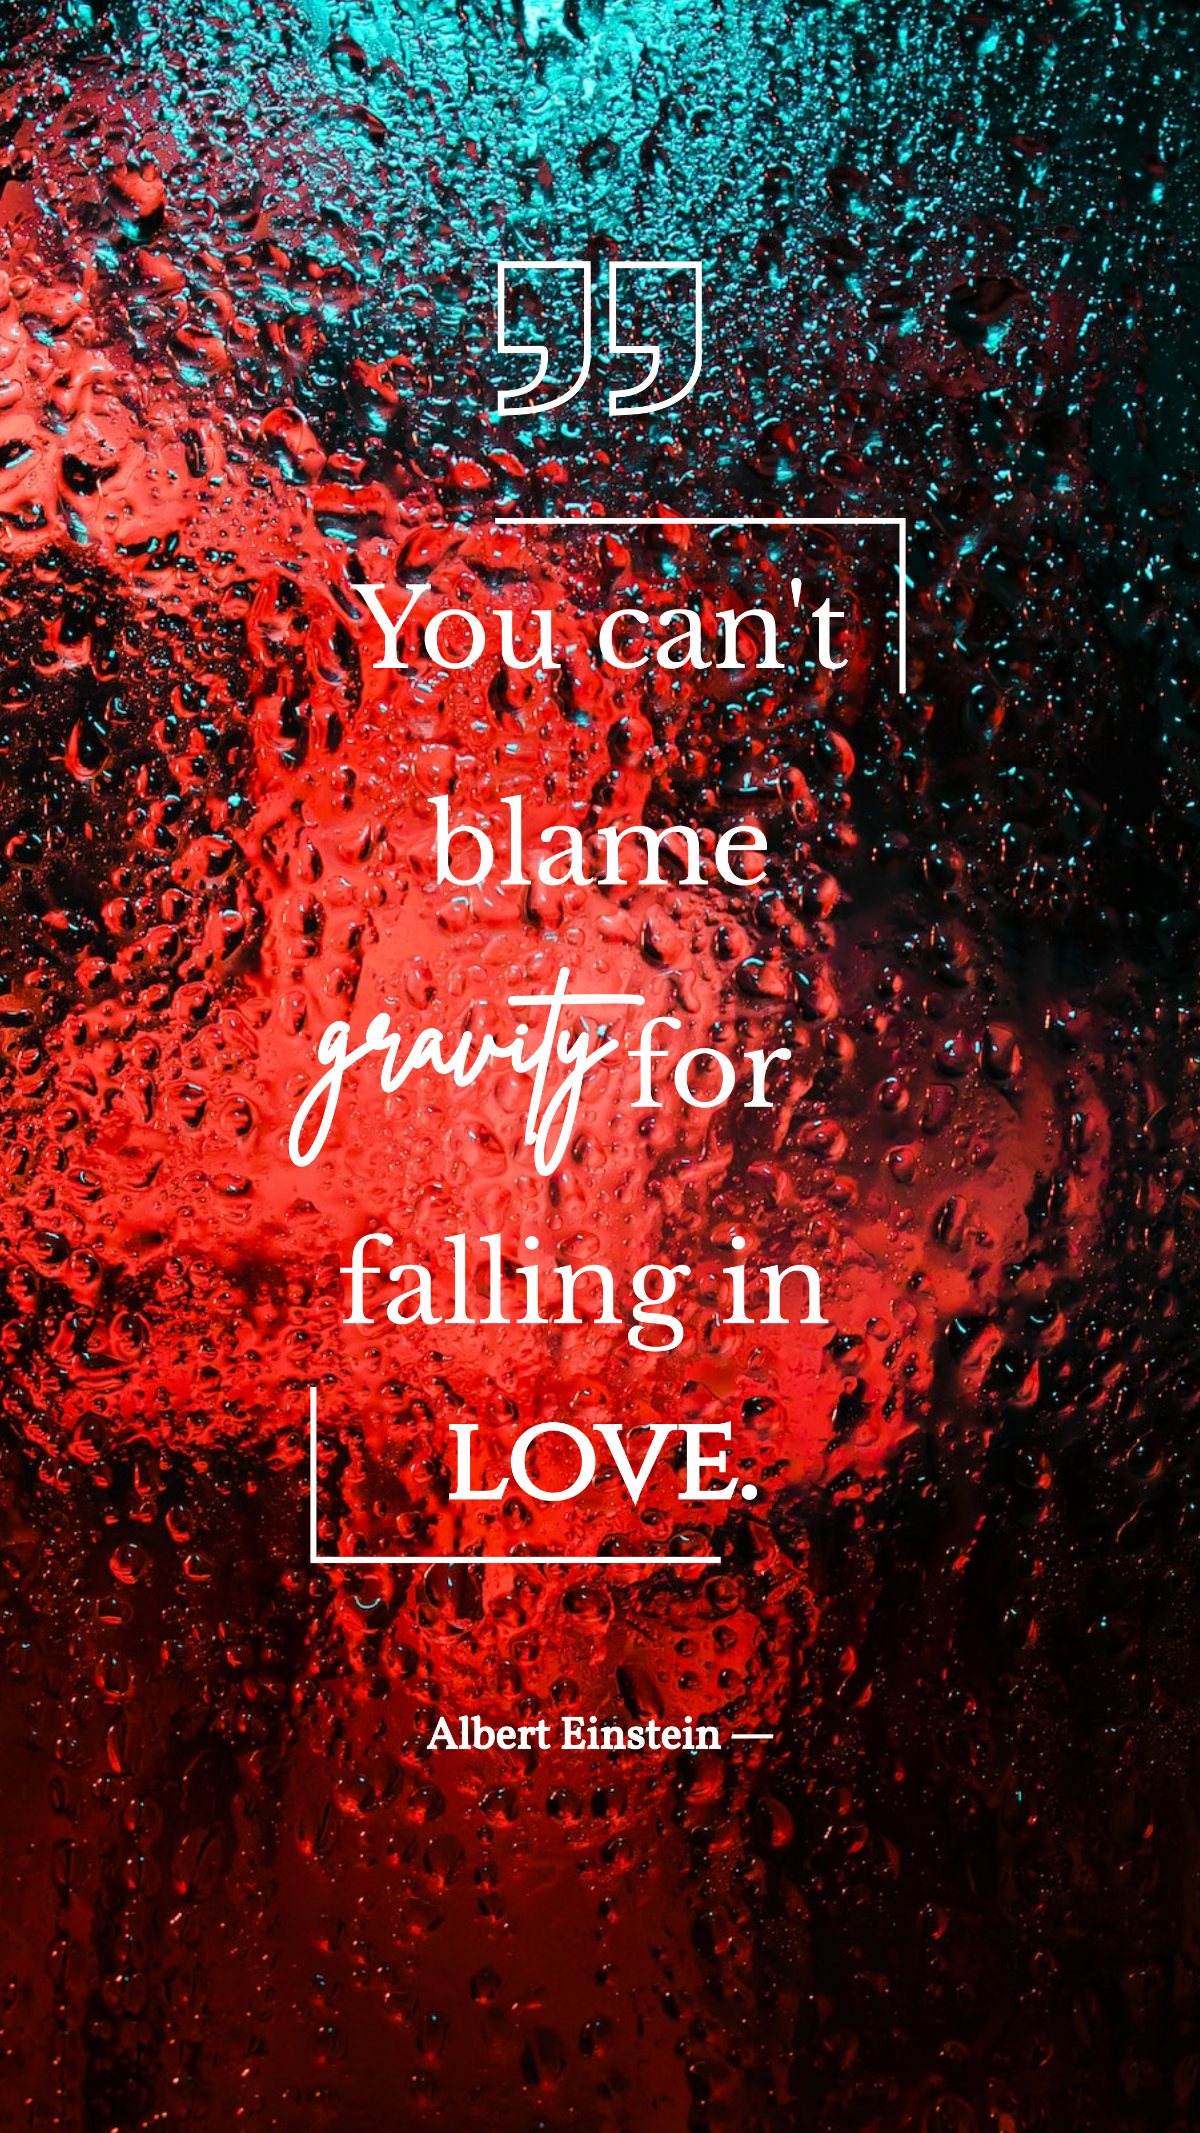 Albert Einstein — You can't blame gravity for falling in love. Template